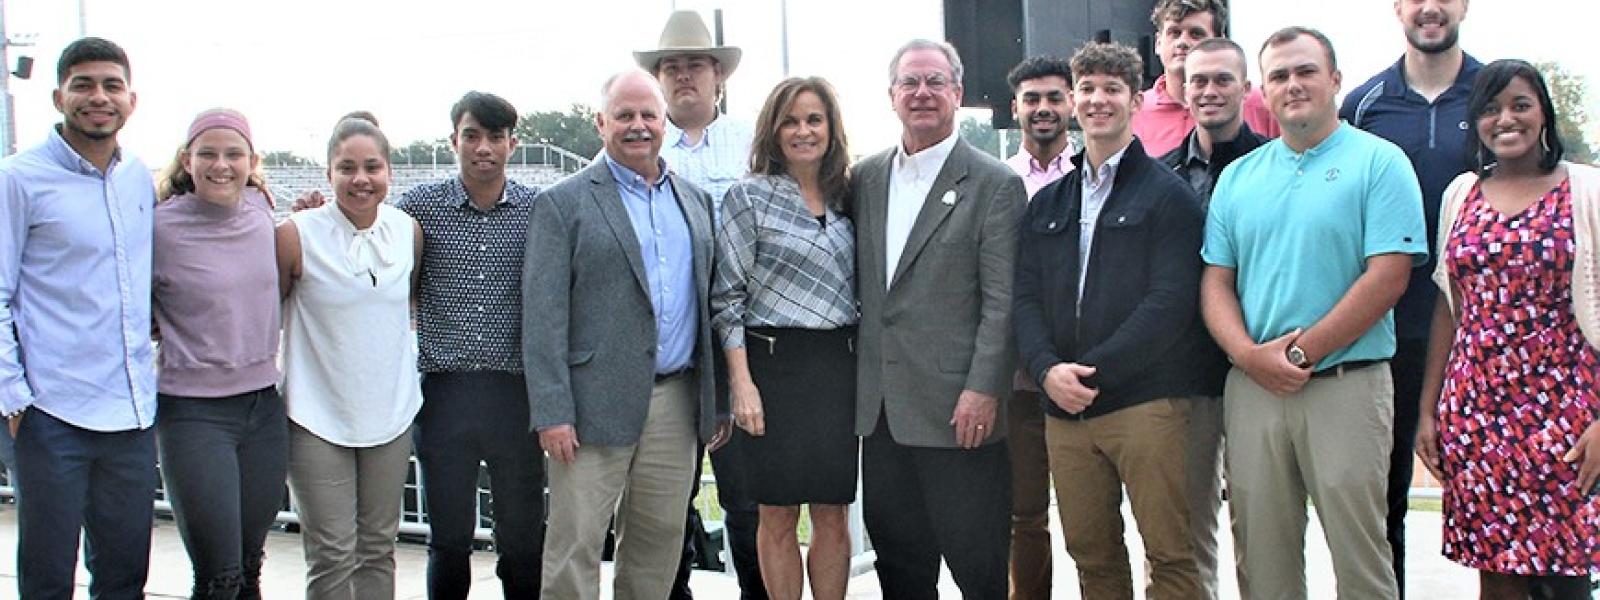 CIU Sport Management majors pose after the Mayor's Prayer Breakfast with their program director Dr. Wayne Rasmussen and Bill and Vicki Shanahan, owners and operators of the Lexington County Blowfish. 